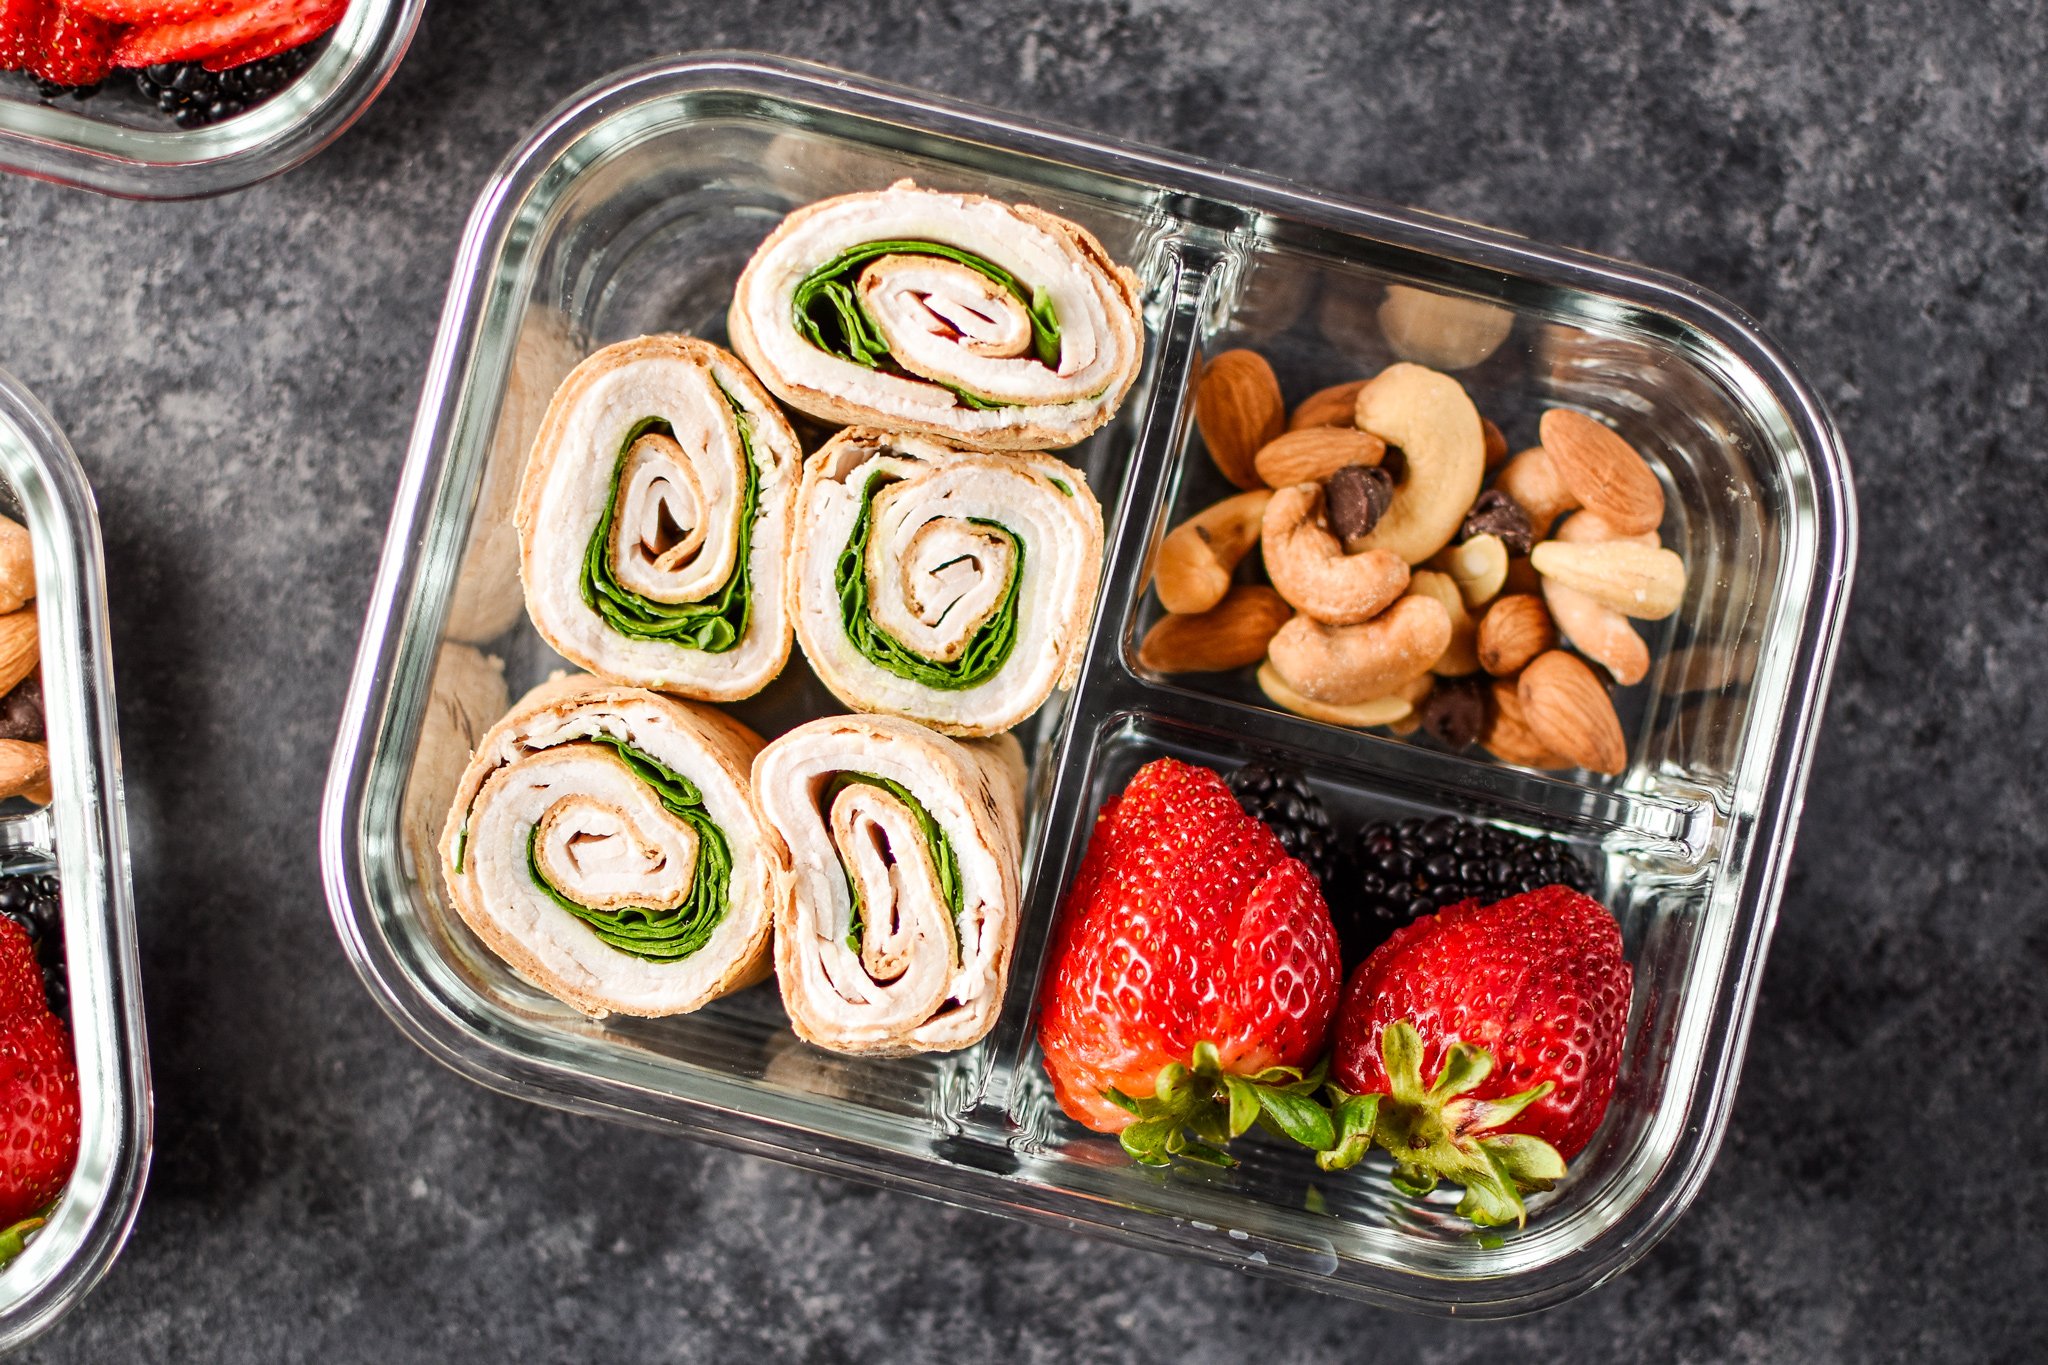 A turkey pinwheel meal prep with berries and nuts.